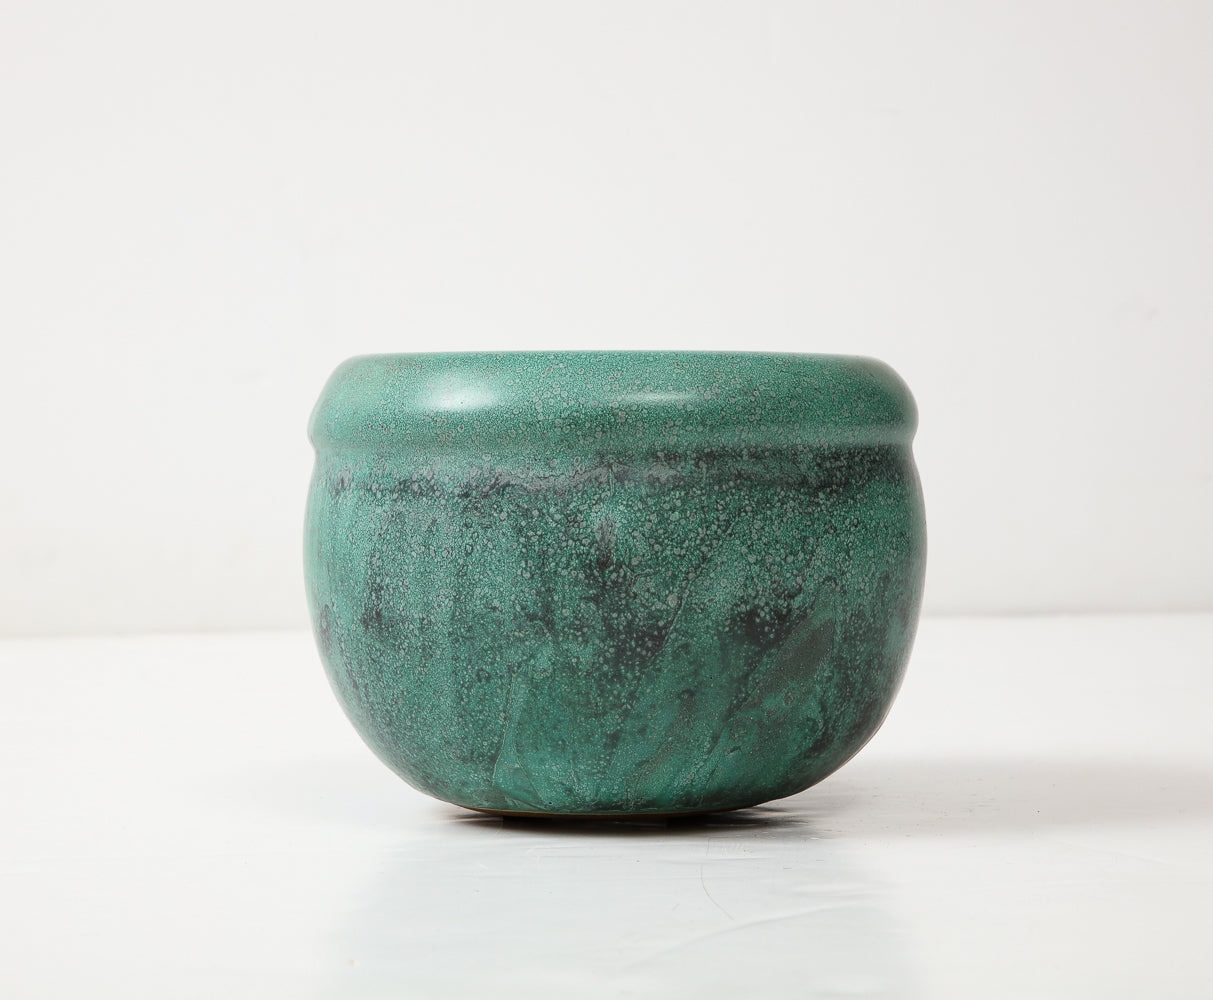 Untitled Bowl #1 by David Haskell